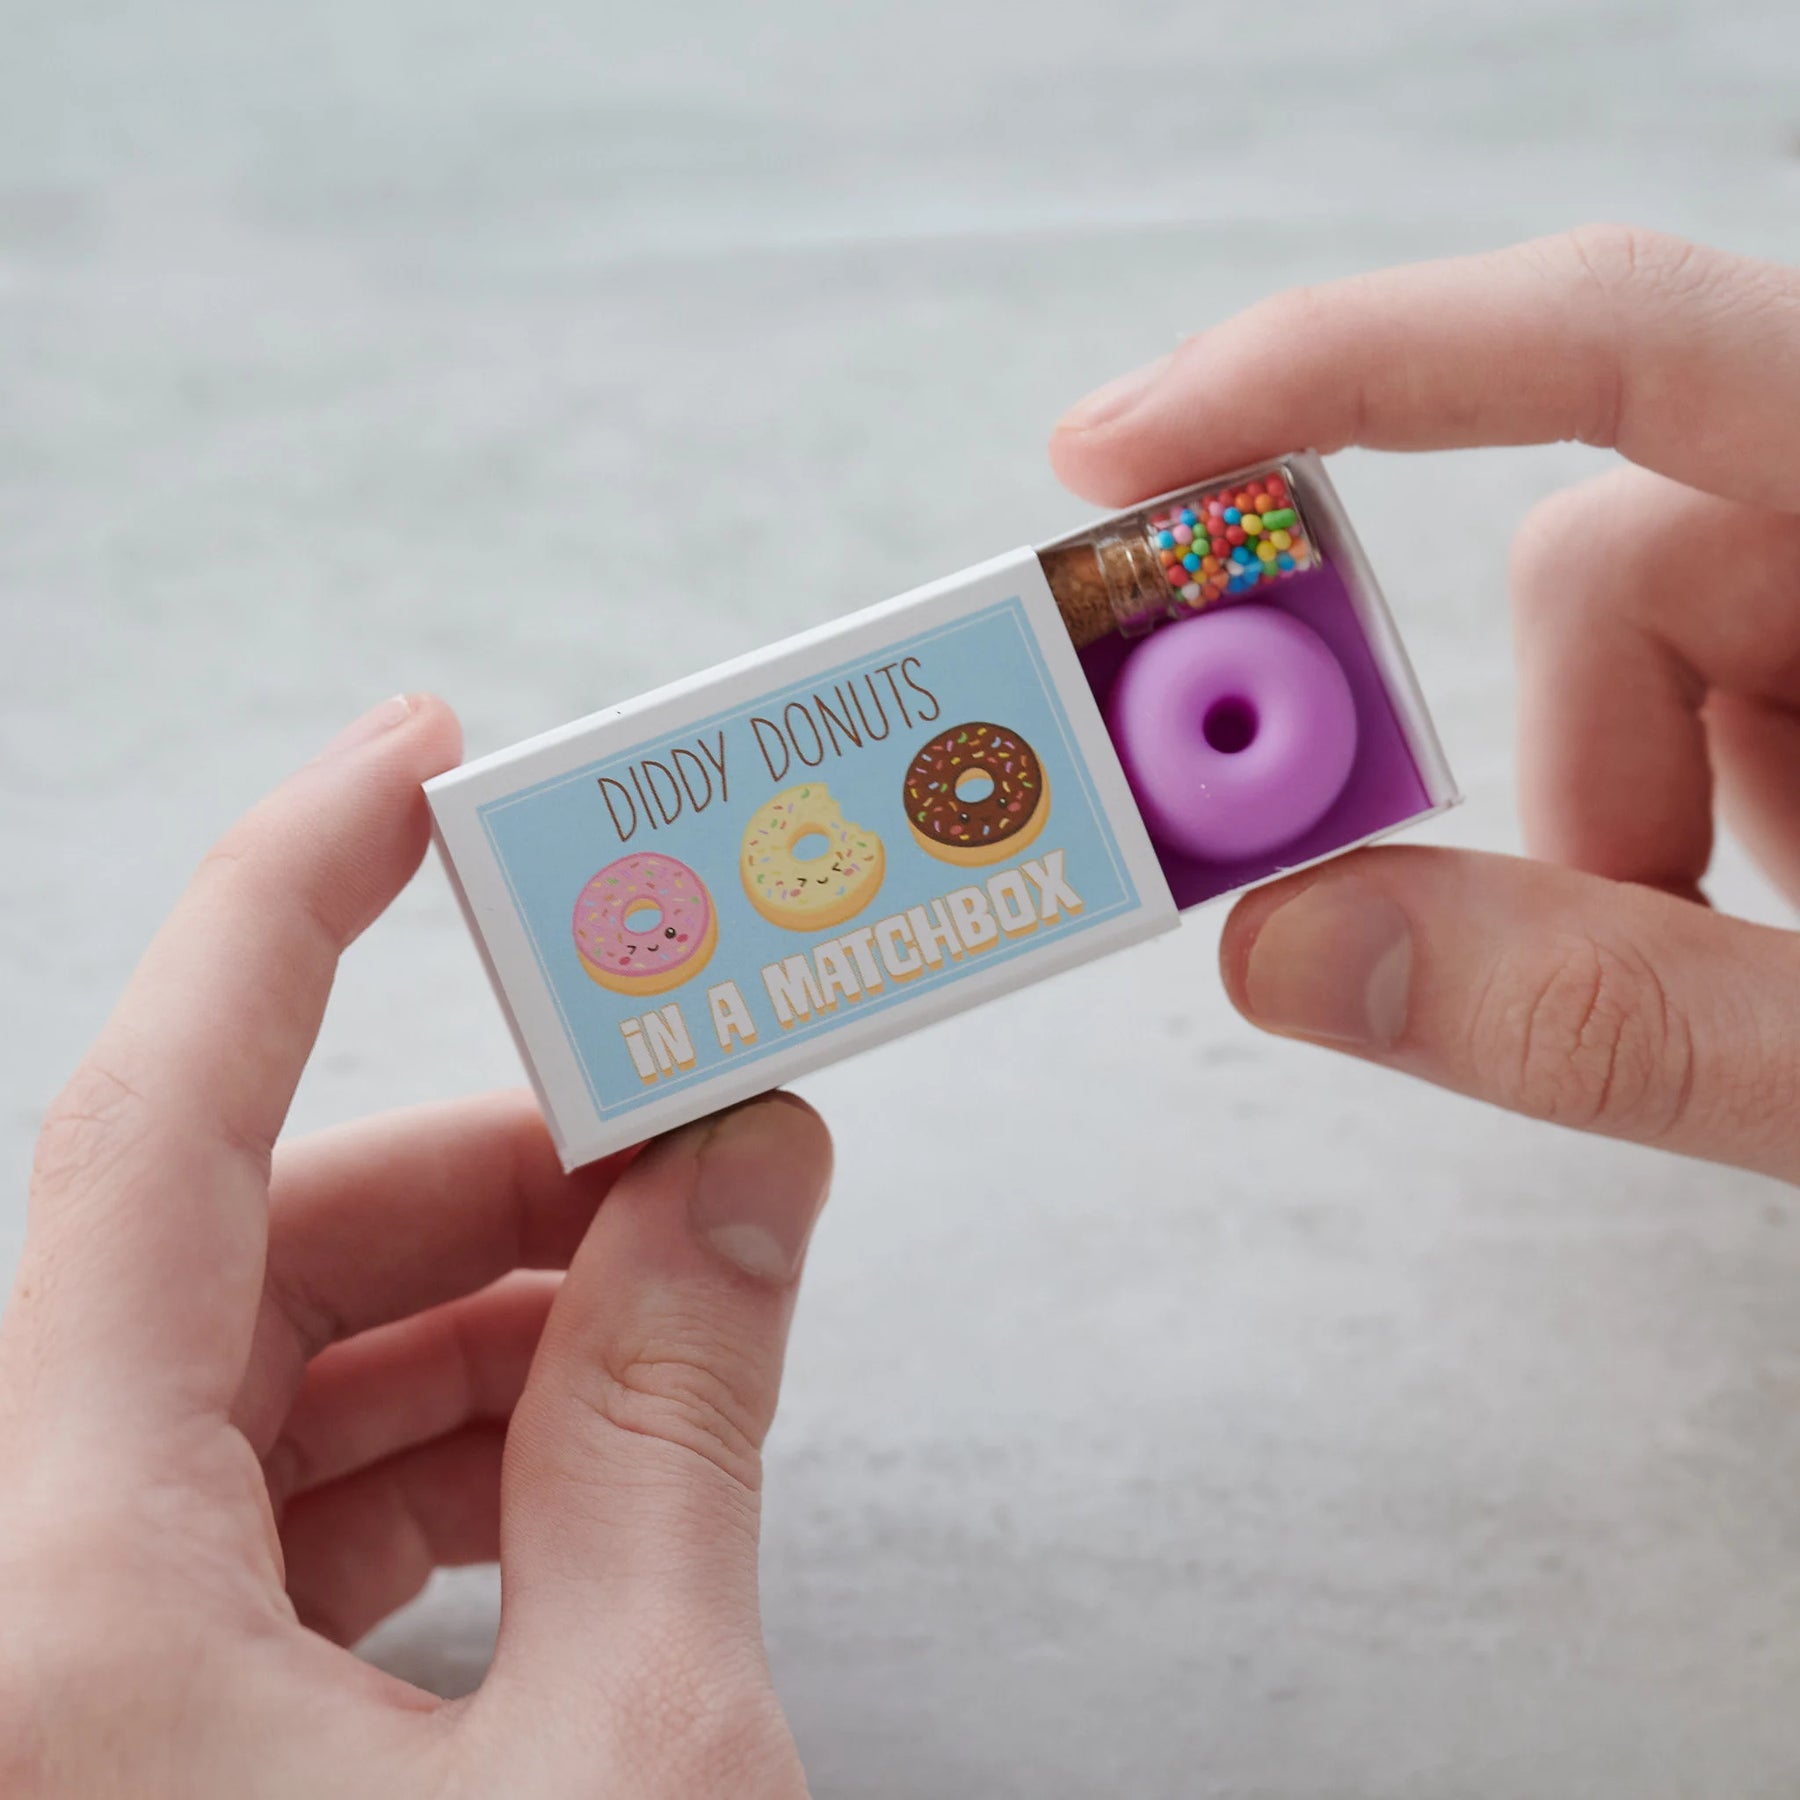 Make Your Own Diddy Donuts In A Matchbox